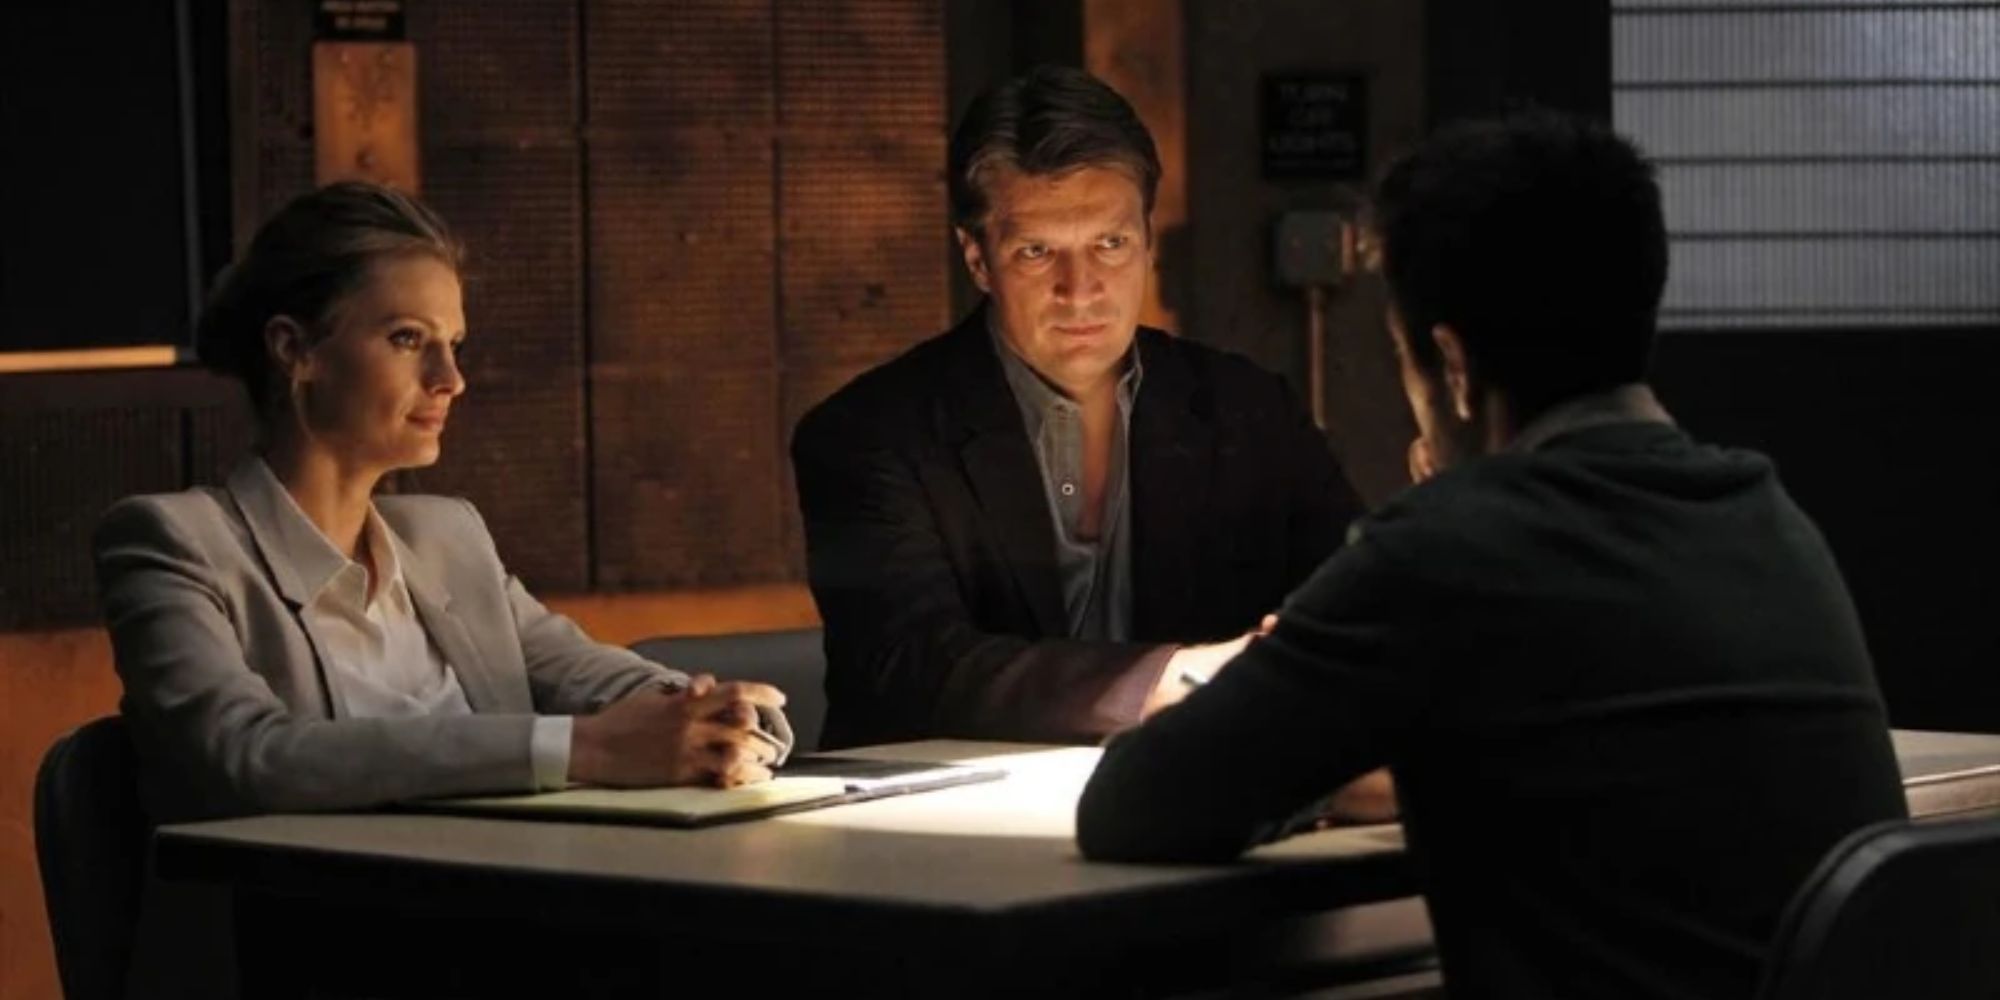 Castle and Beckett question a suspect 